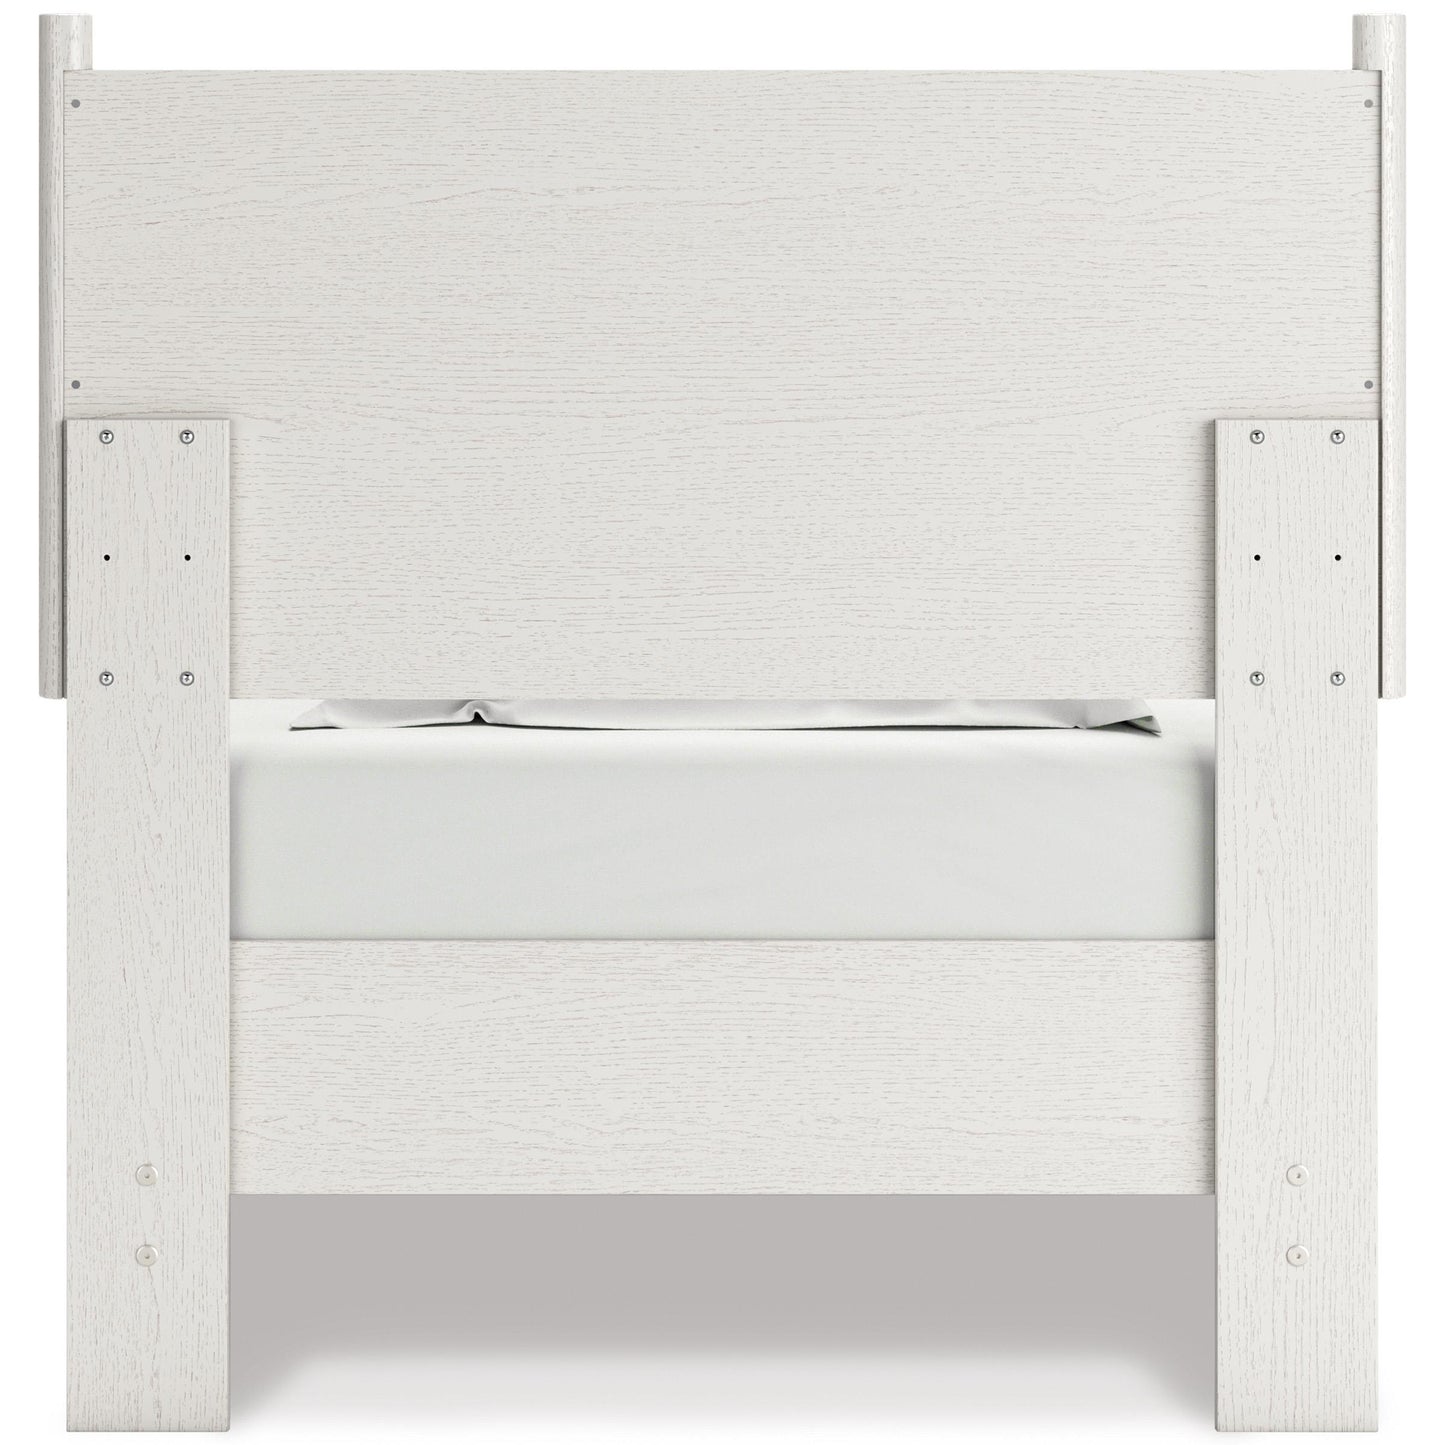 Signature Design by Ashley Kids Beds Bed EB1024-155/EB1024-111 IMAGE 4